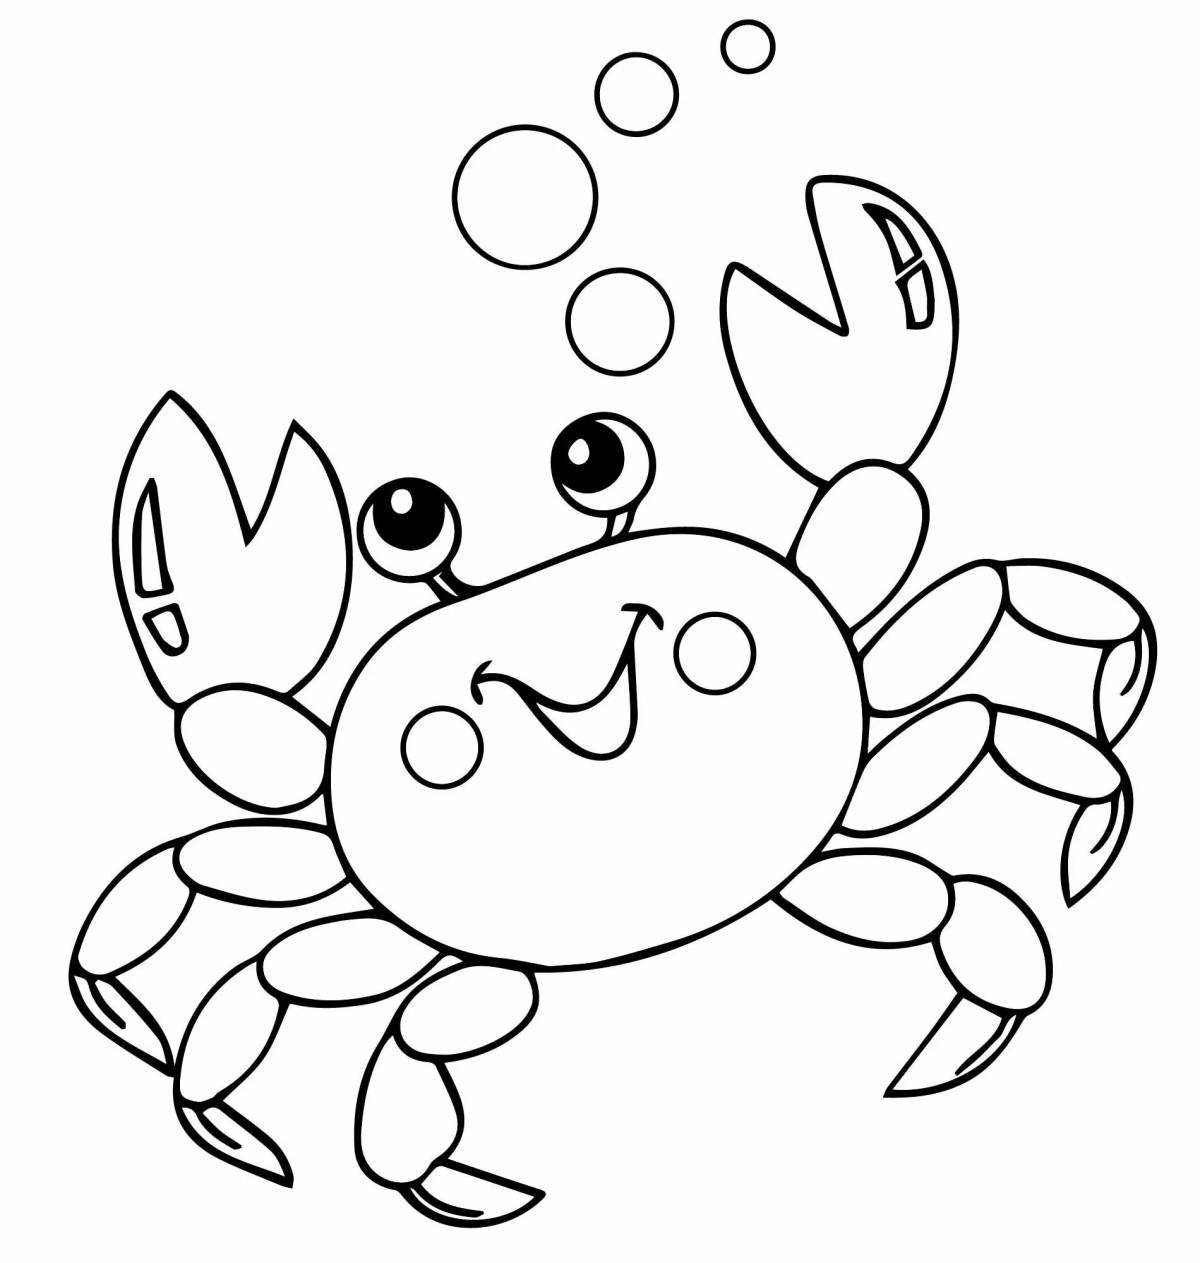 Coloring page charming captain crab